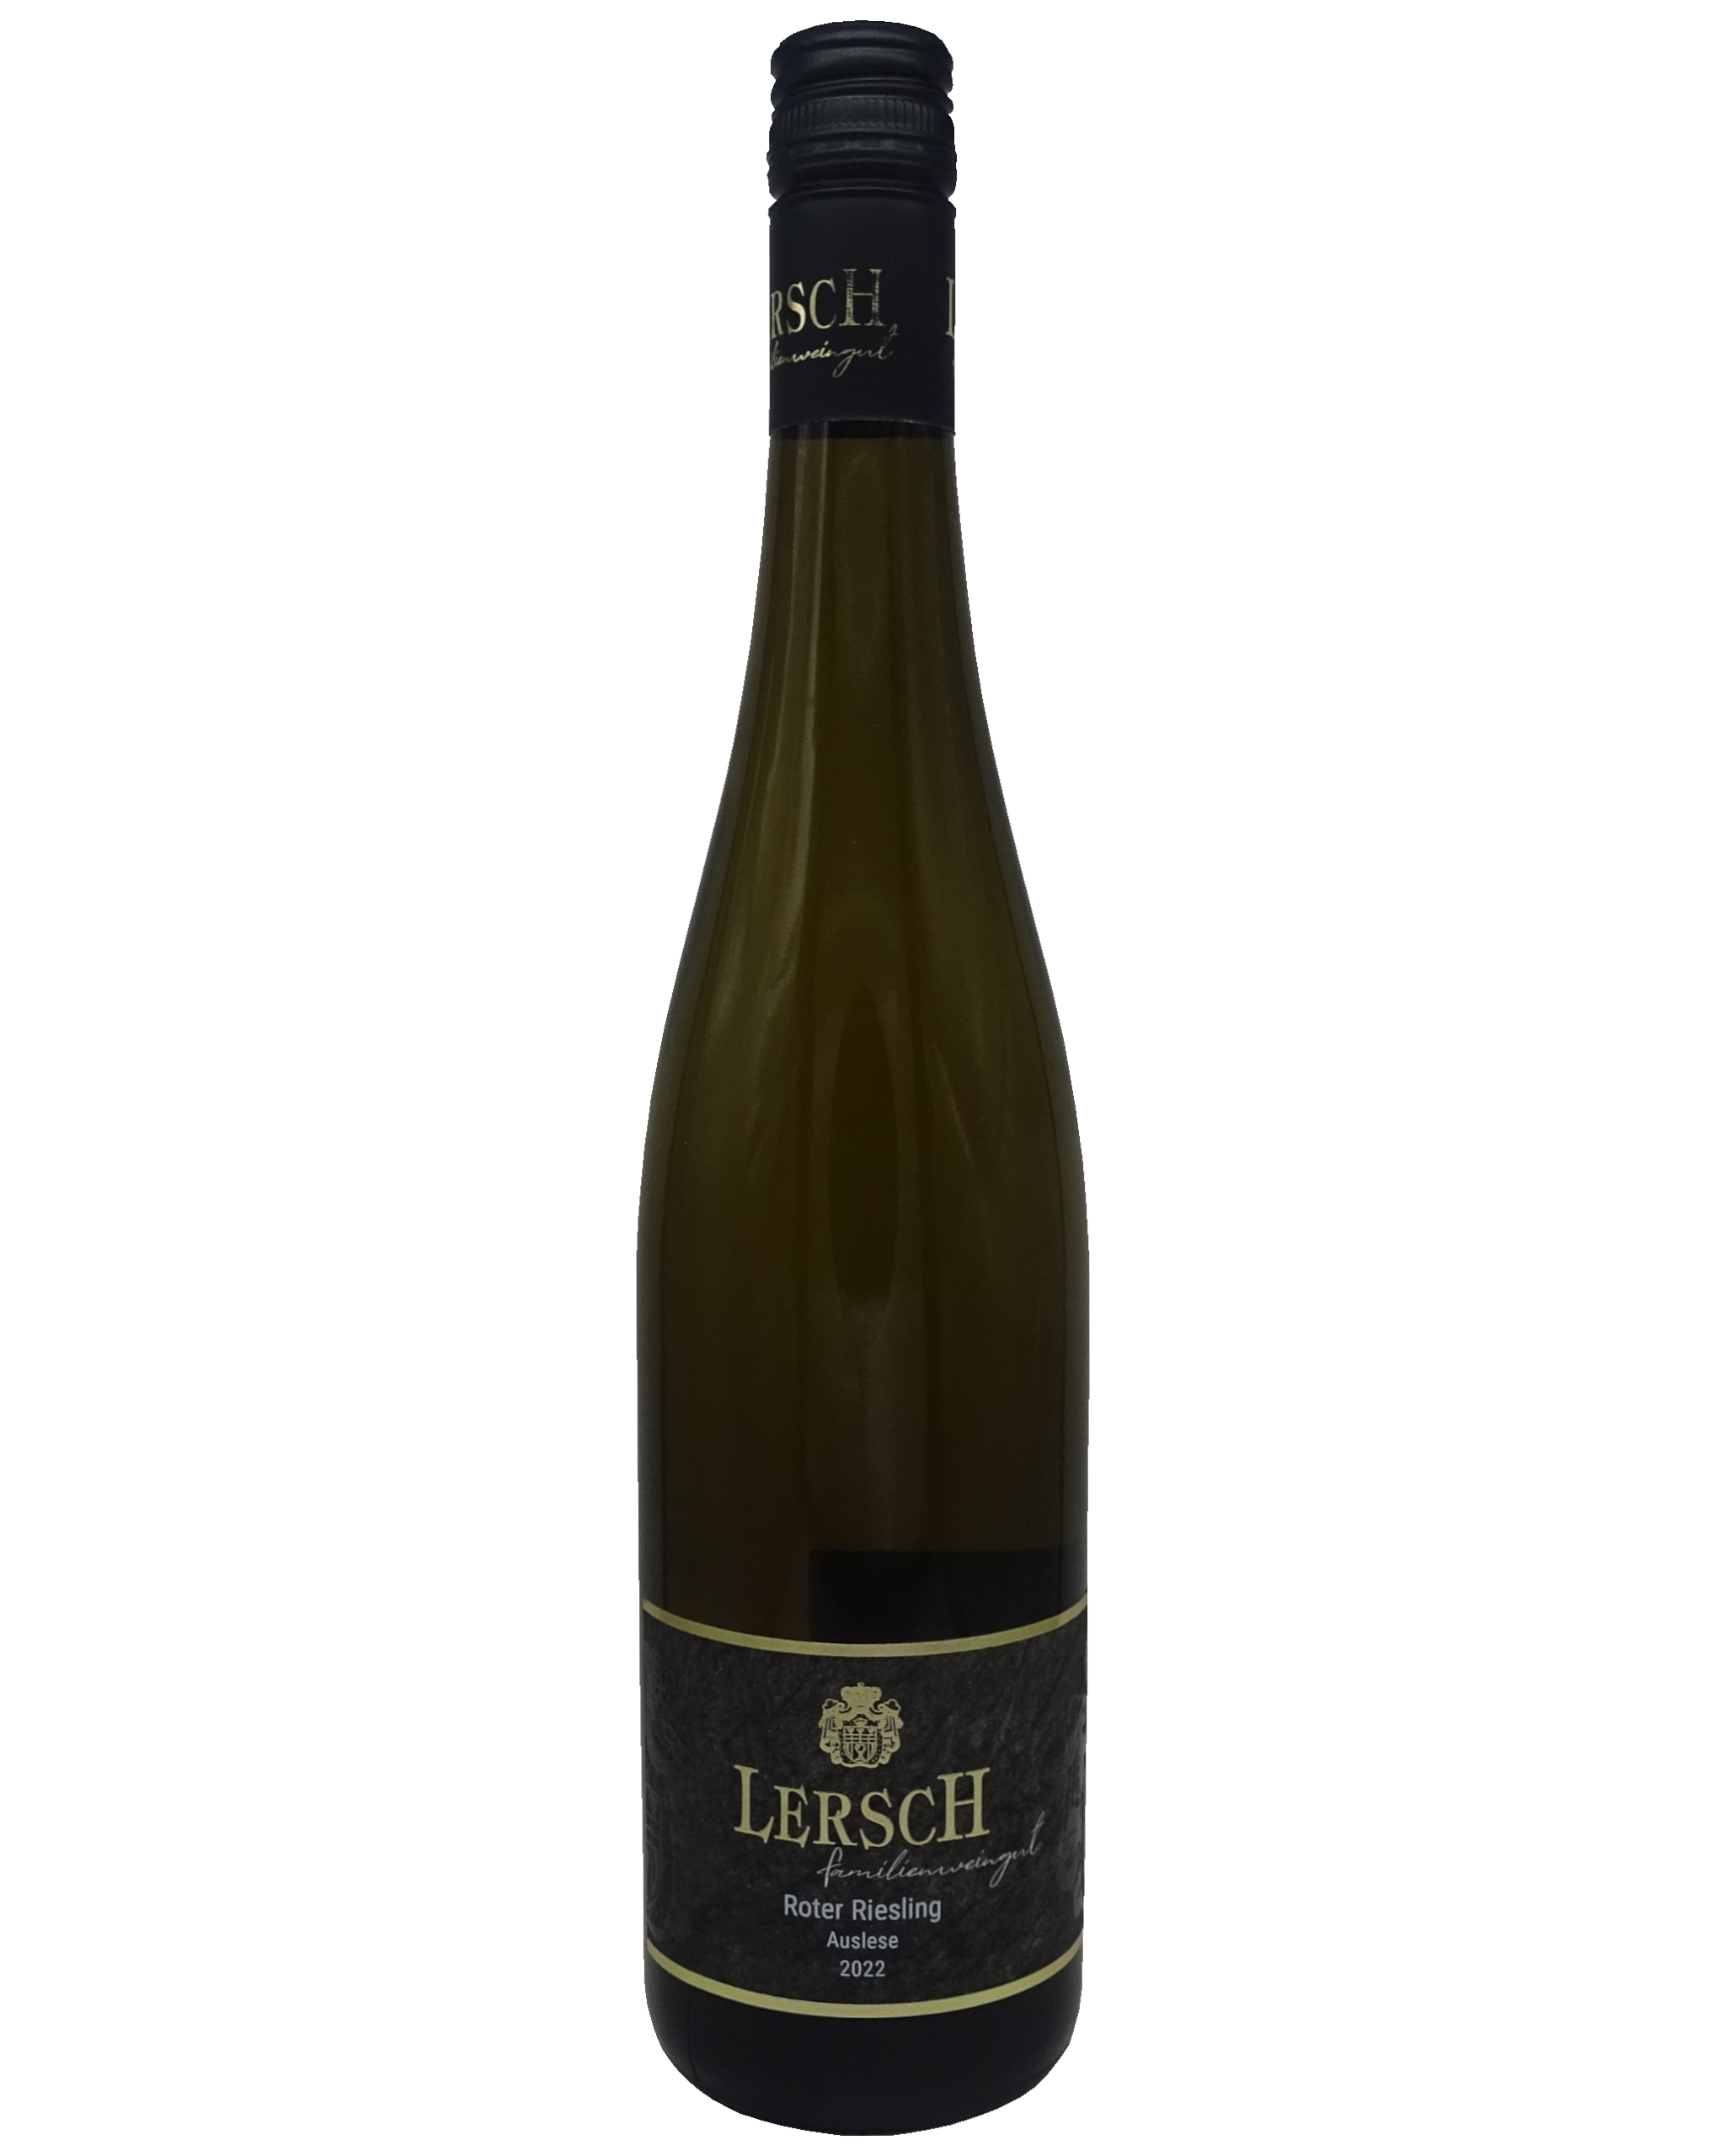 Roter Riesling Auslese